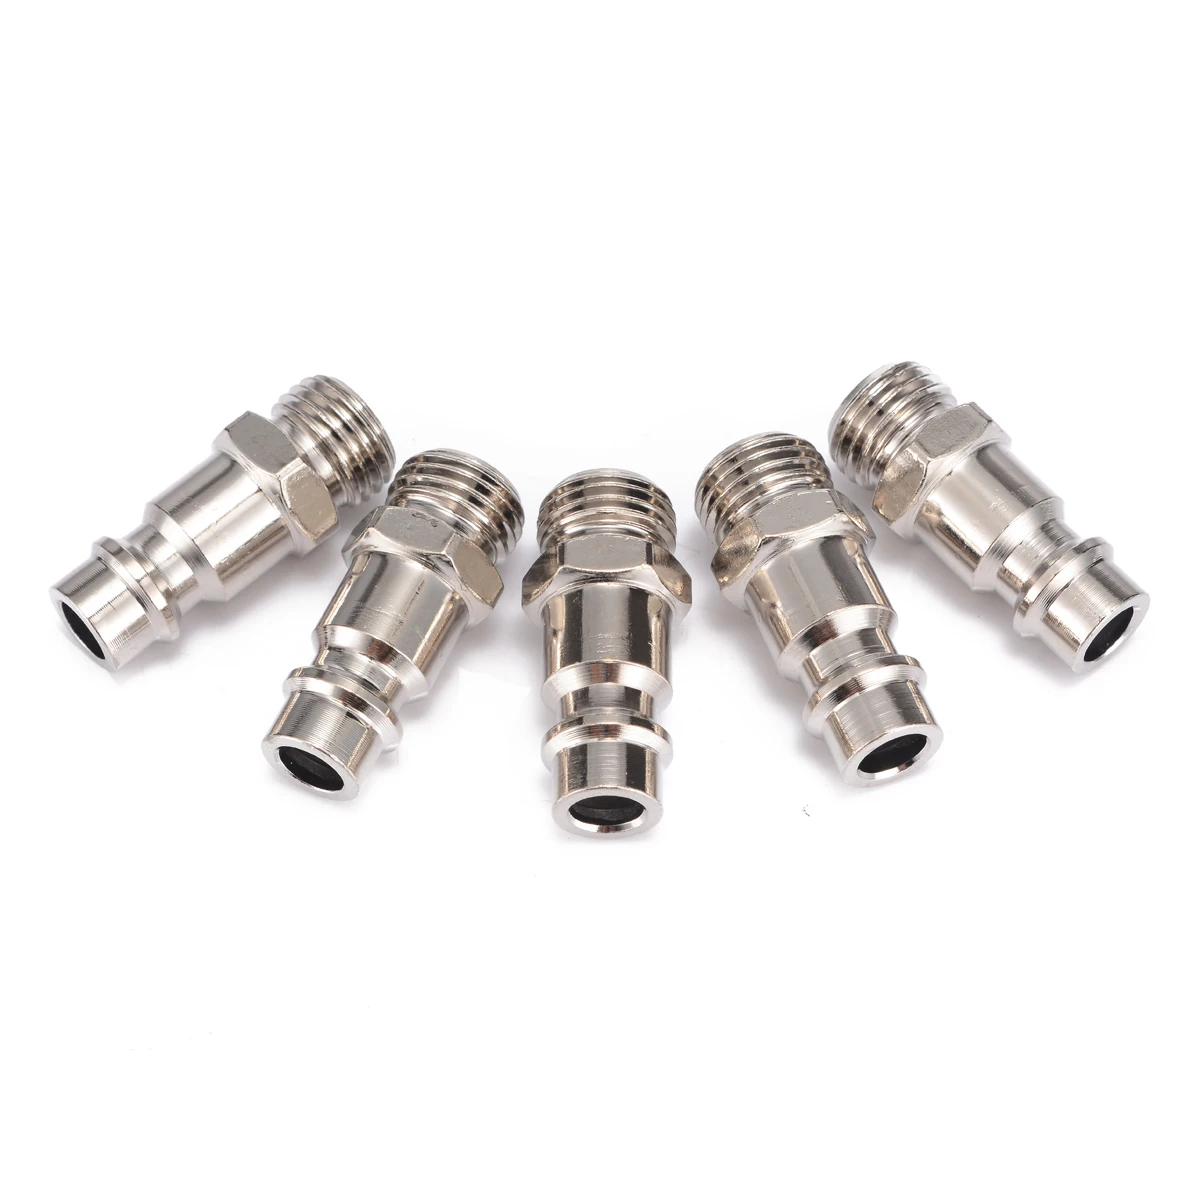 Euro Air Line Hose Compressor Fittings Connector Male Quick Release 5 PACK 1/4 